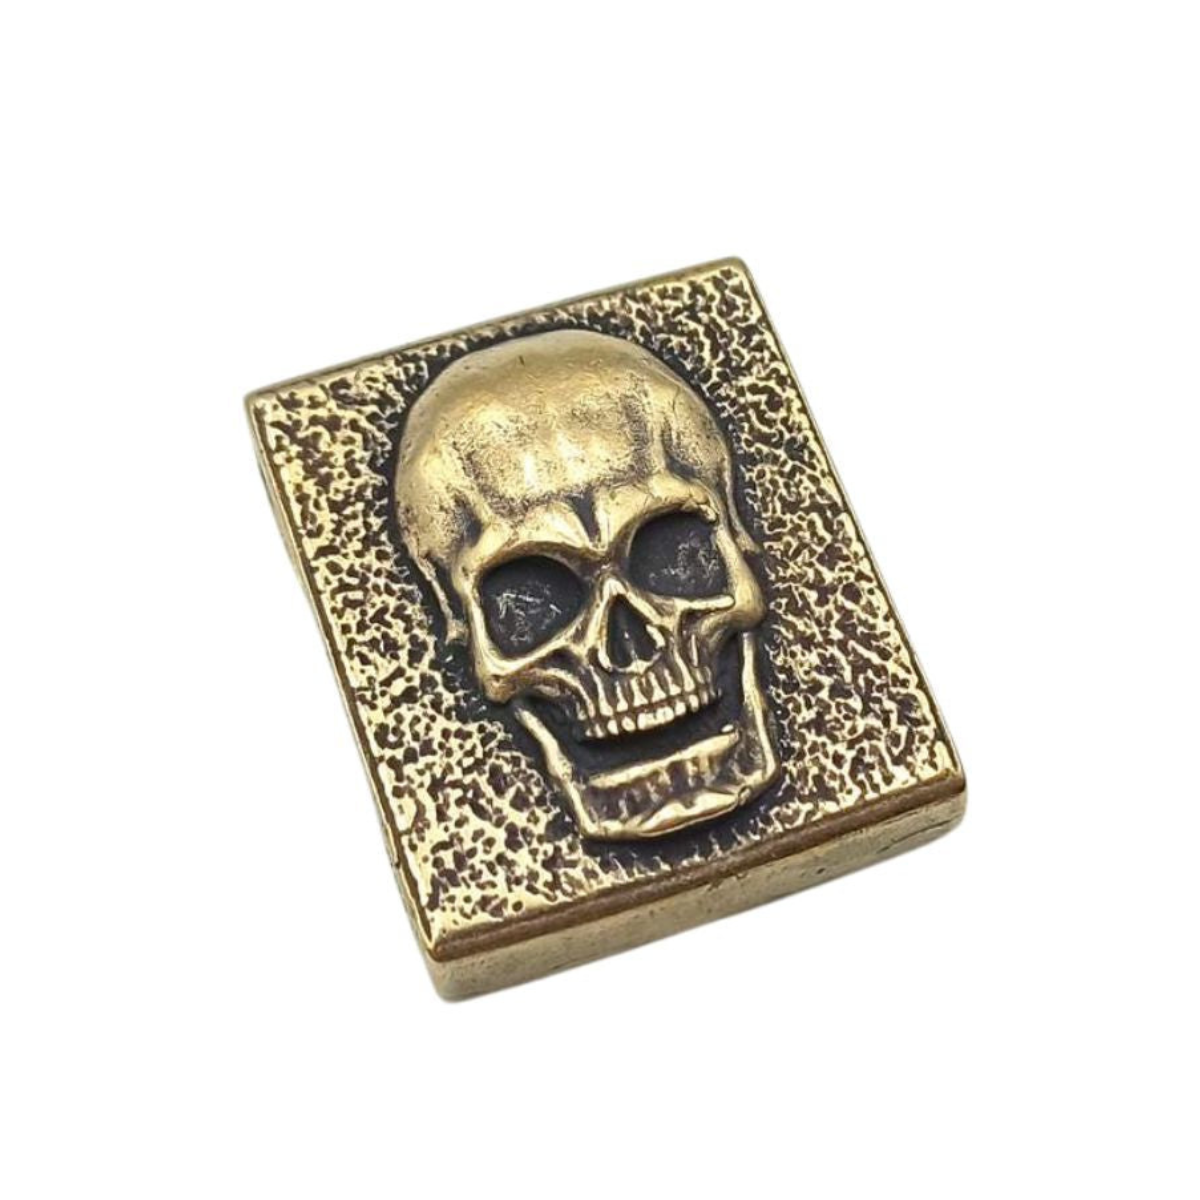 Human Skull Molle Clip Metal Edc Gear Patch 